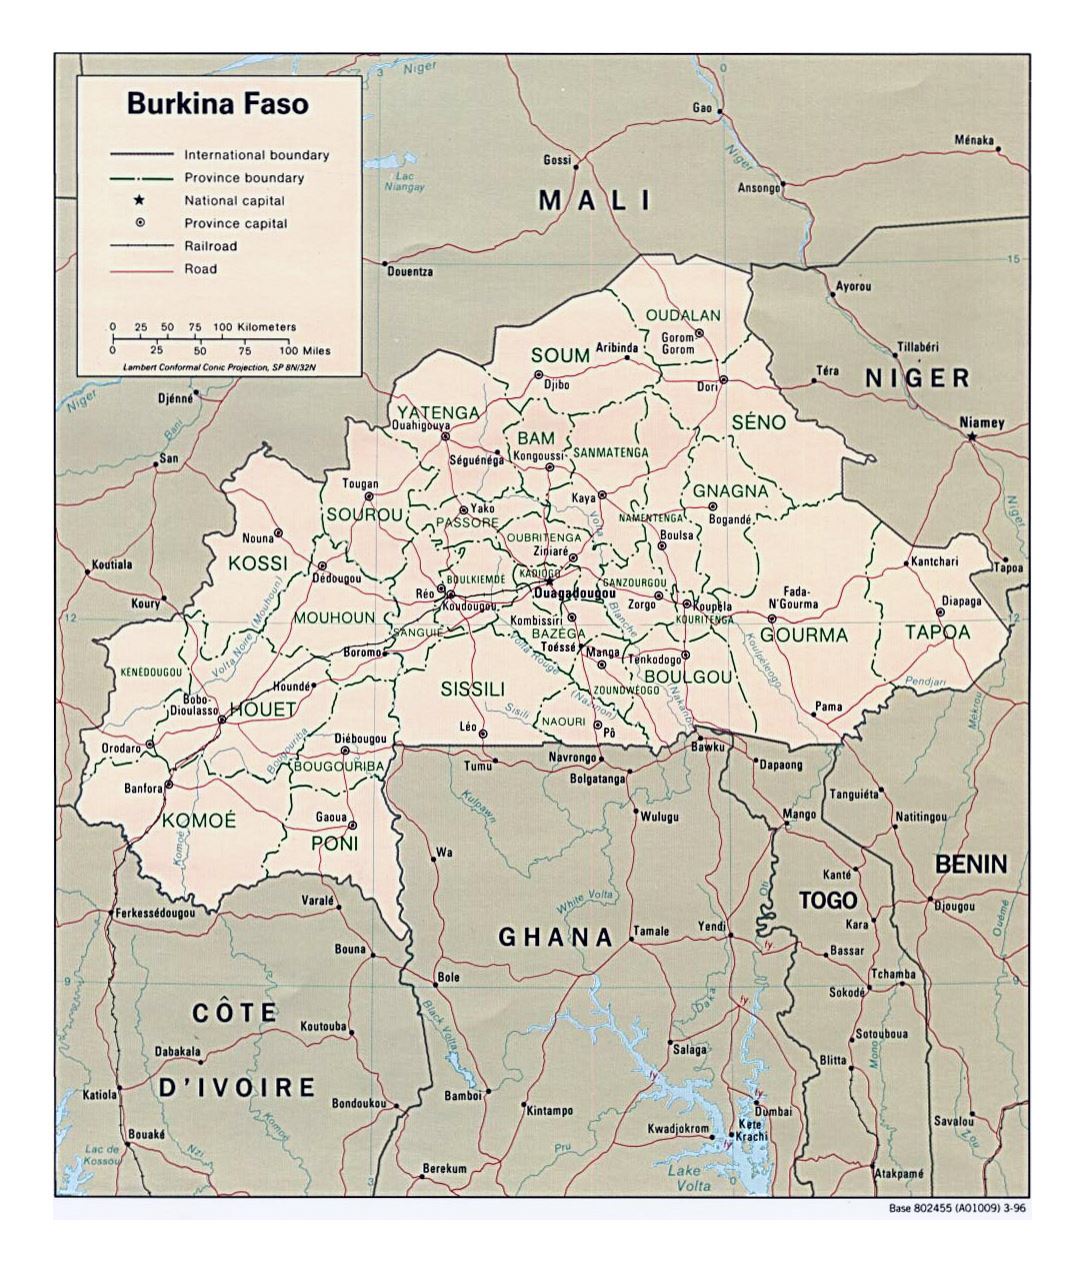 Detailed political and administrative map of Burkina Faso with roads, railroads and major cities - 1996